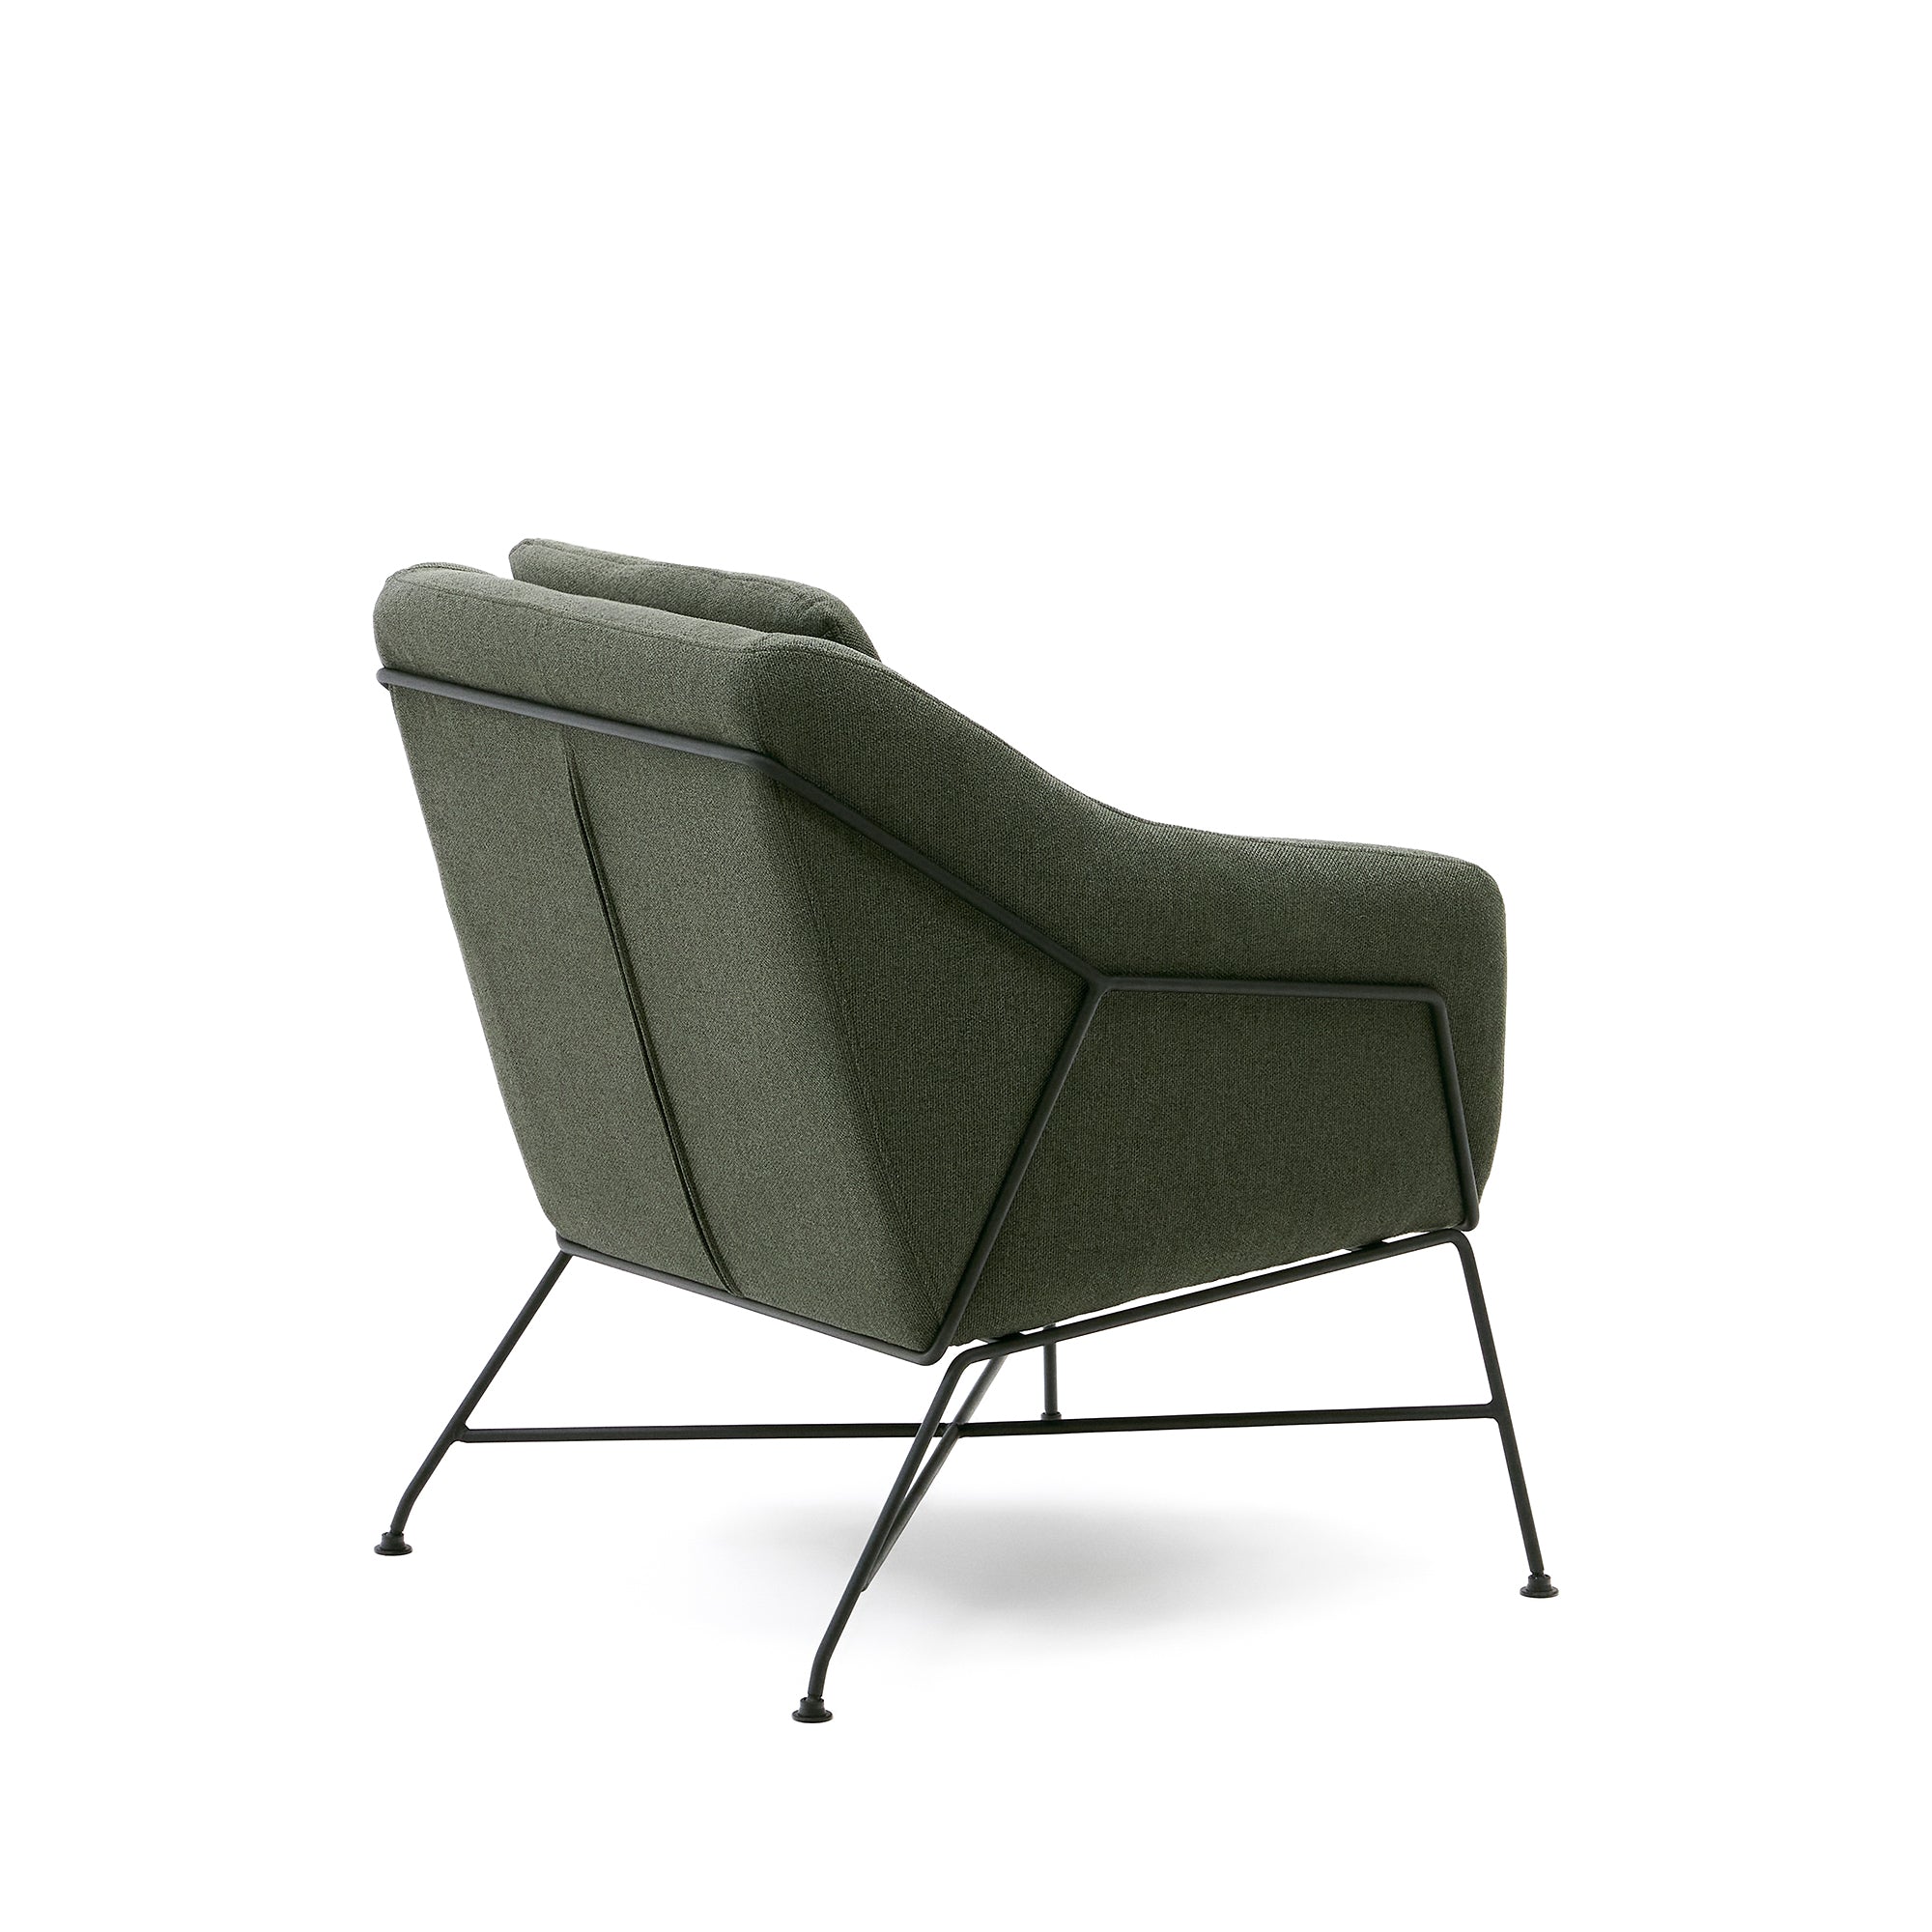 Brida armchair in green and steel legs with black finish 